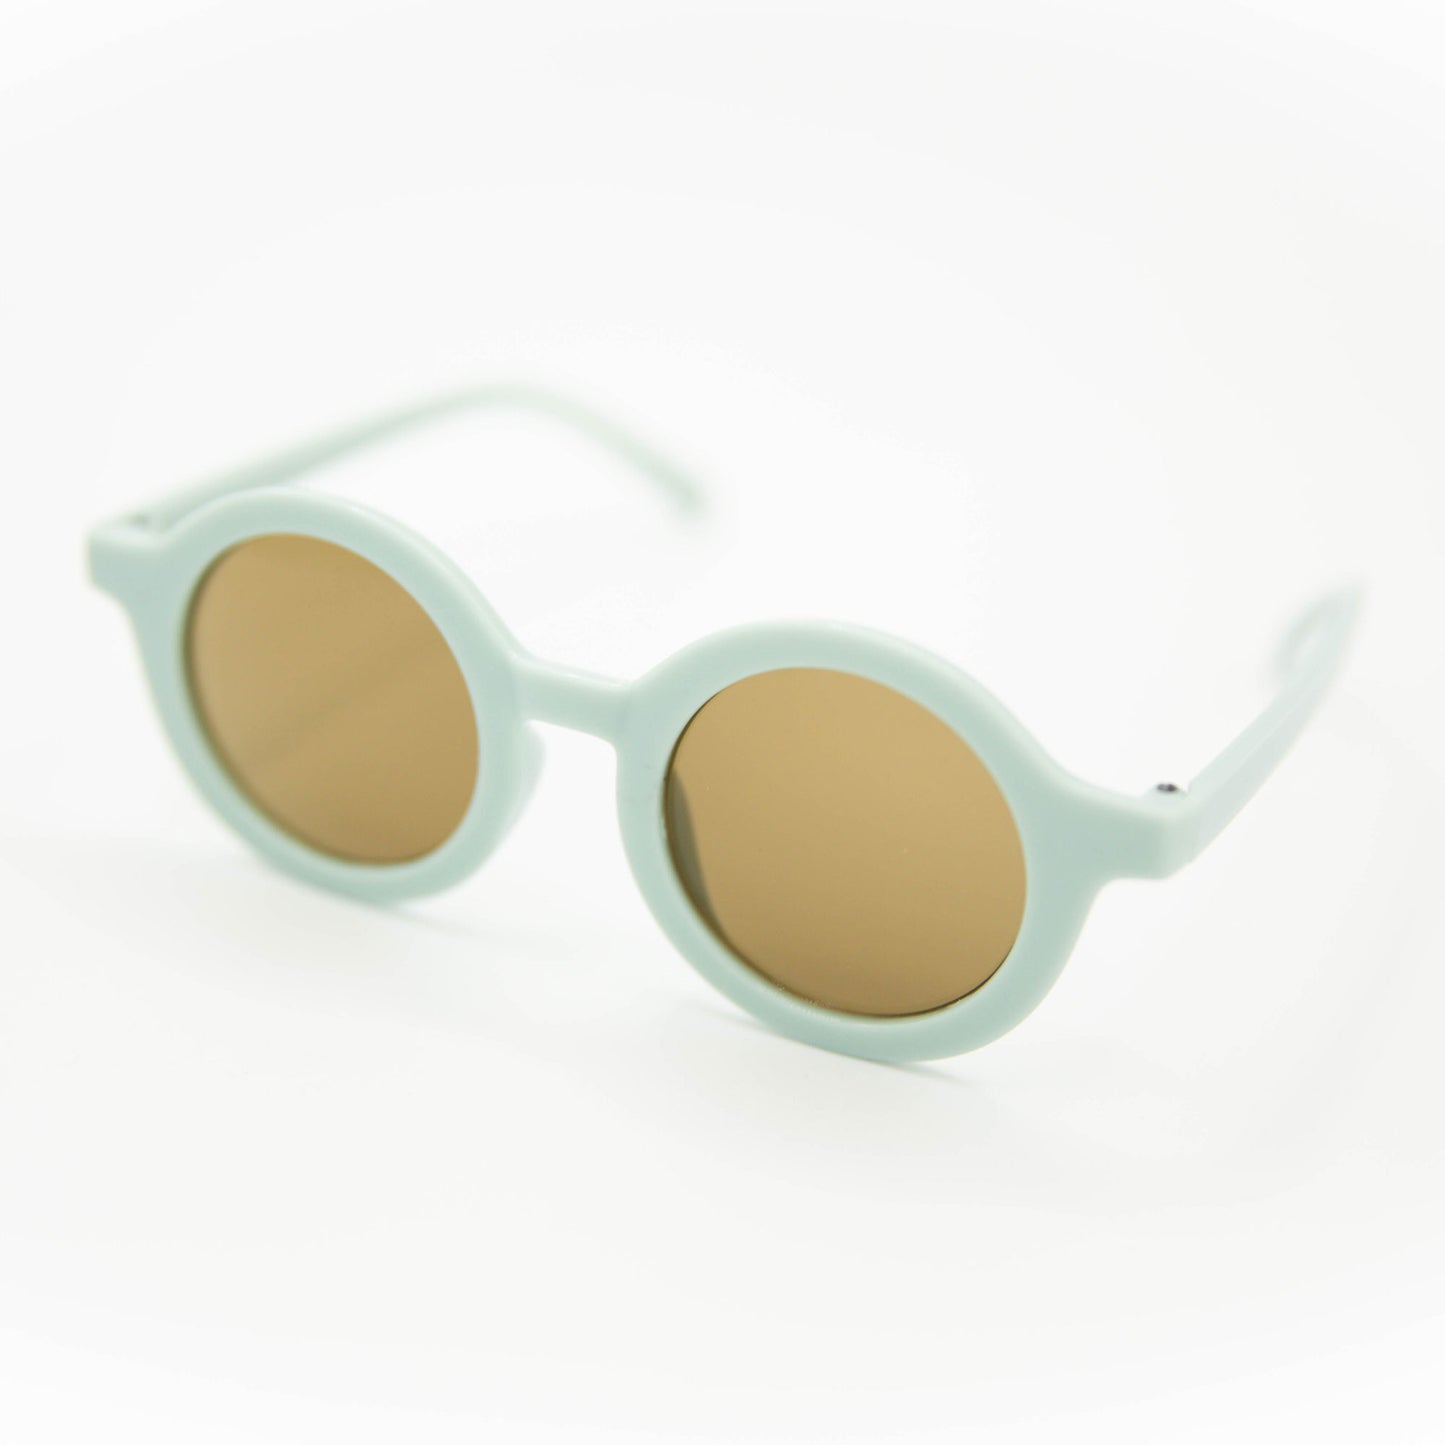 The Baby Cubby Kids' Round Retro Sunglasses - Dusty Blue with Brown Lenses